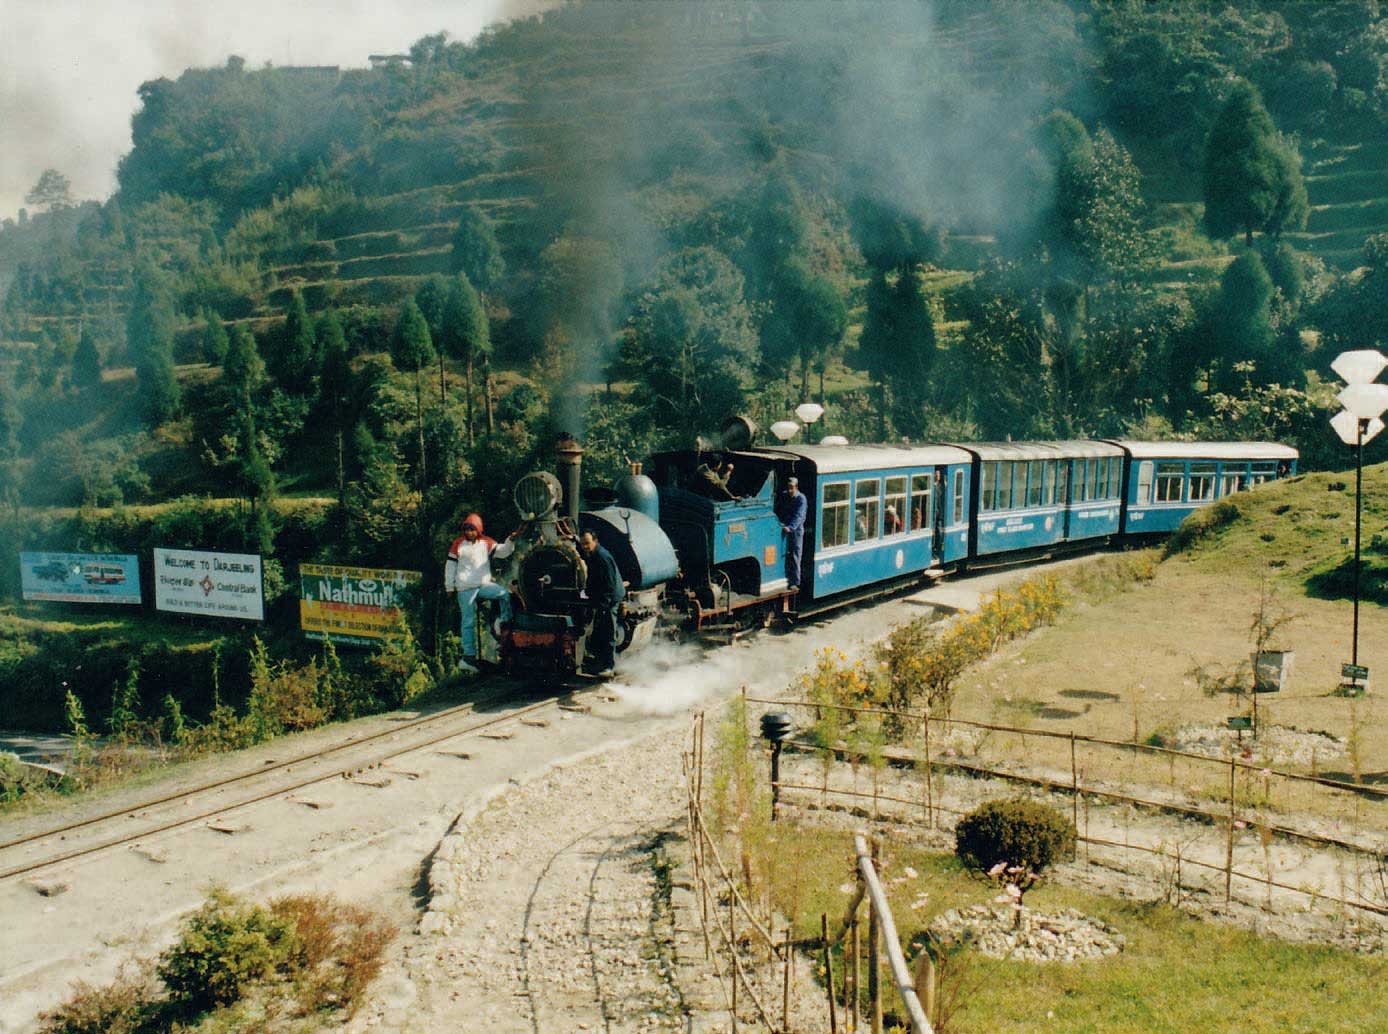 The Darjeeling Himalayan is without doubt the most iconic of the hill railways - photo 5